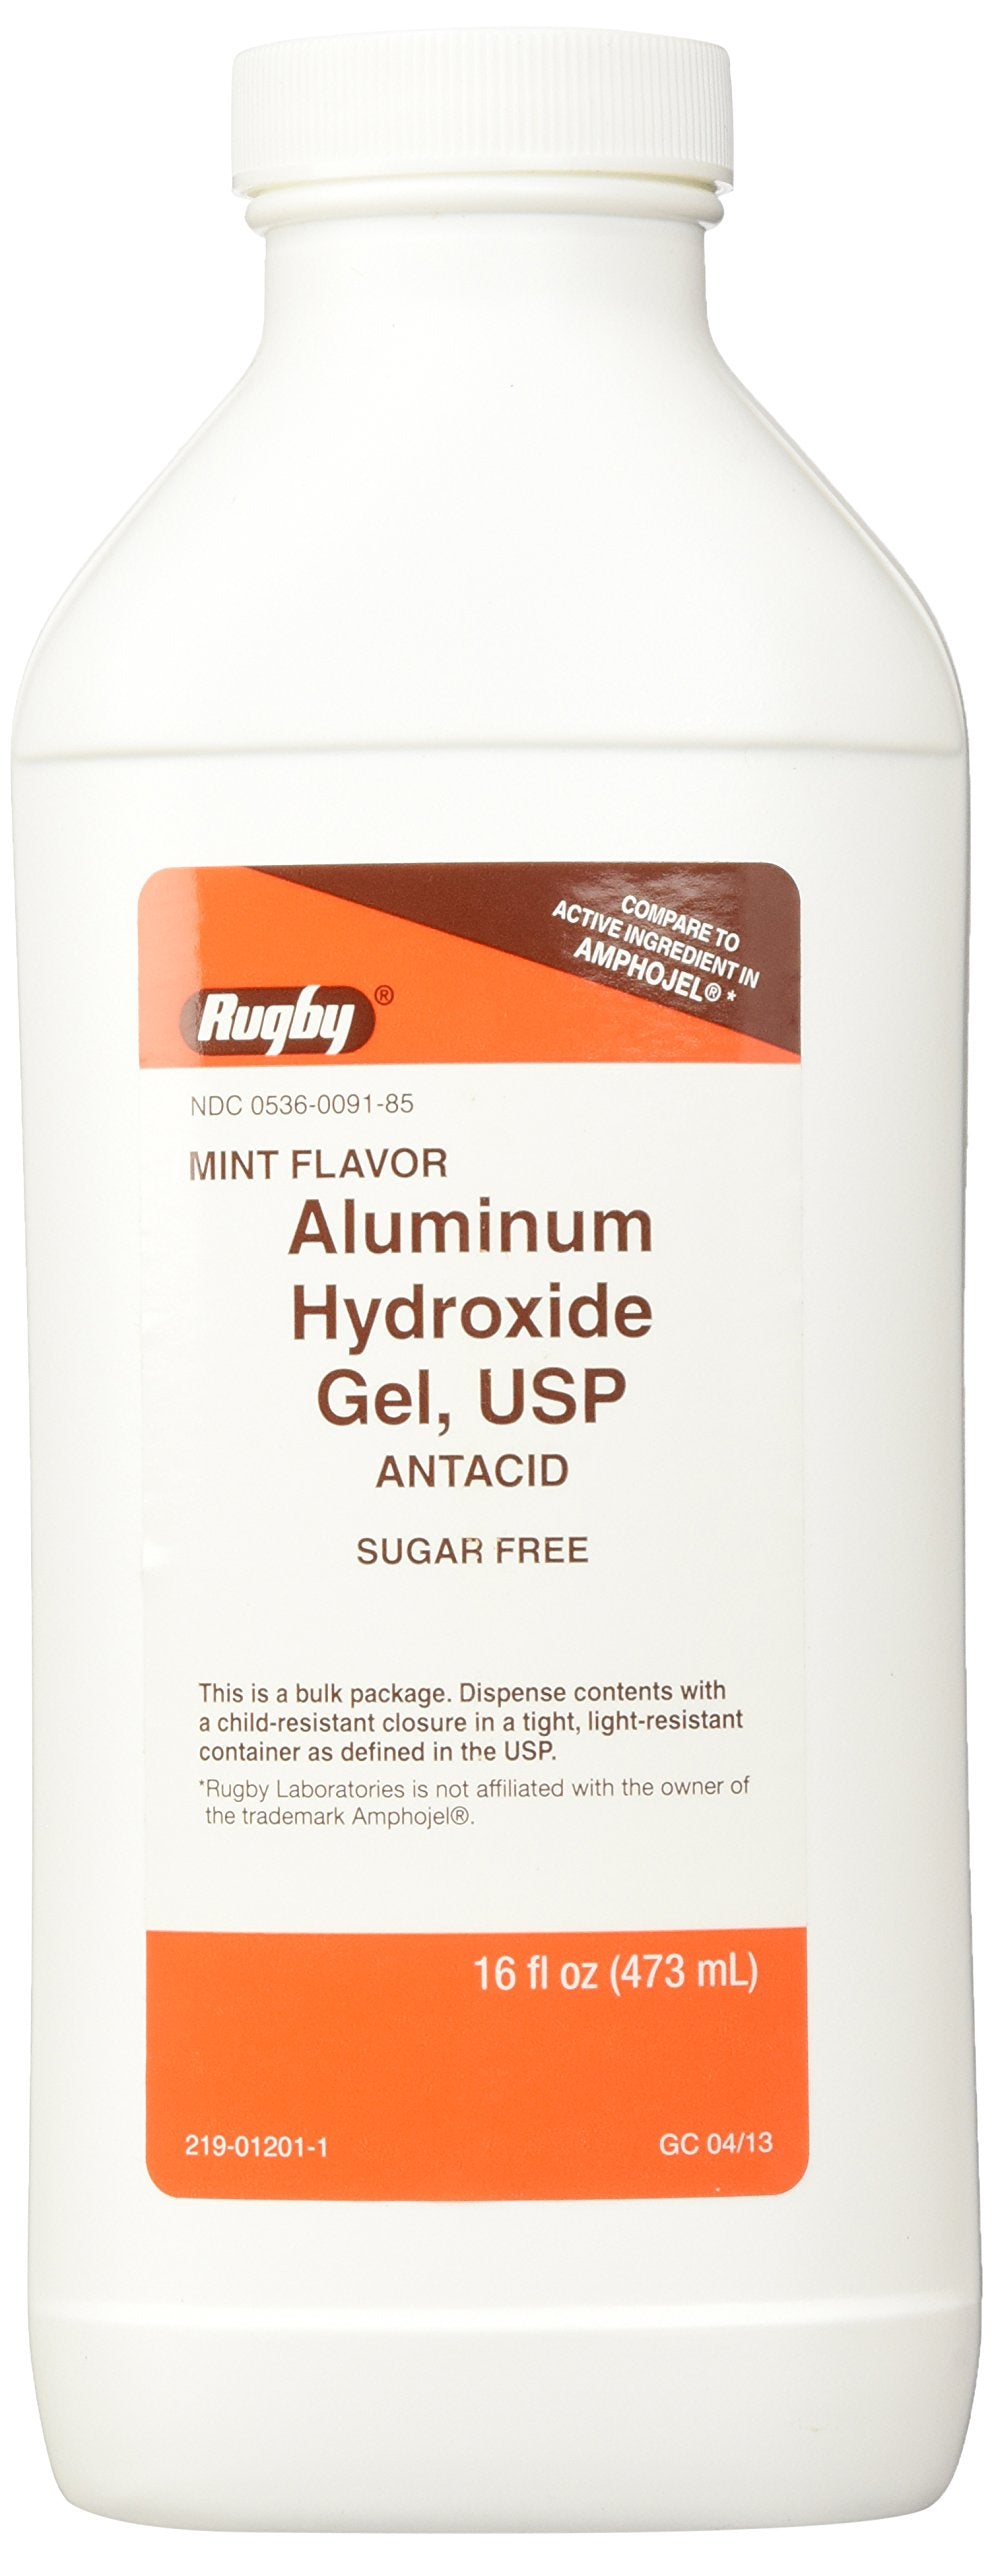 Aluminum Hydro Gel, USP 320mg/5mL 473mL *Compare to Amphojel* by Watson Rugby